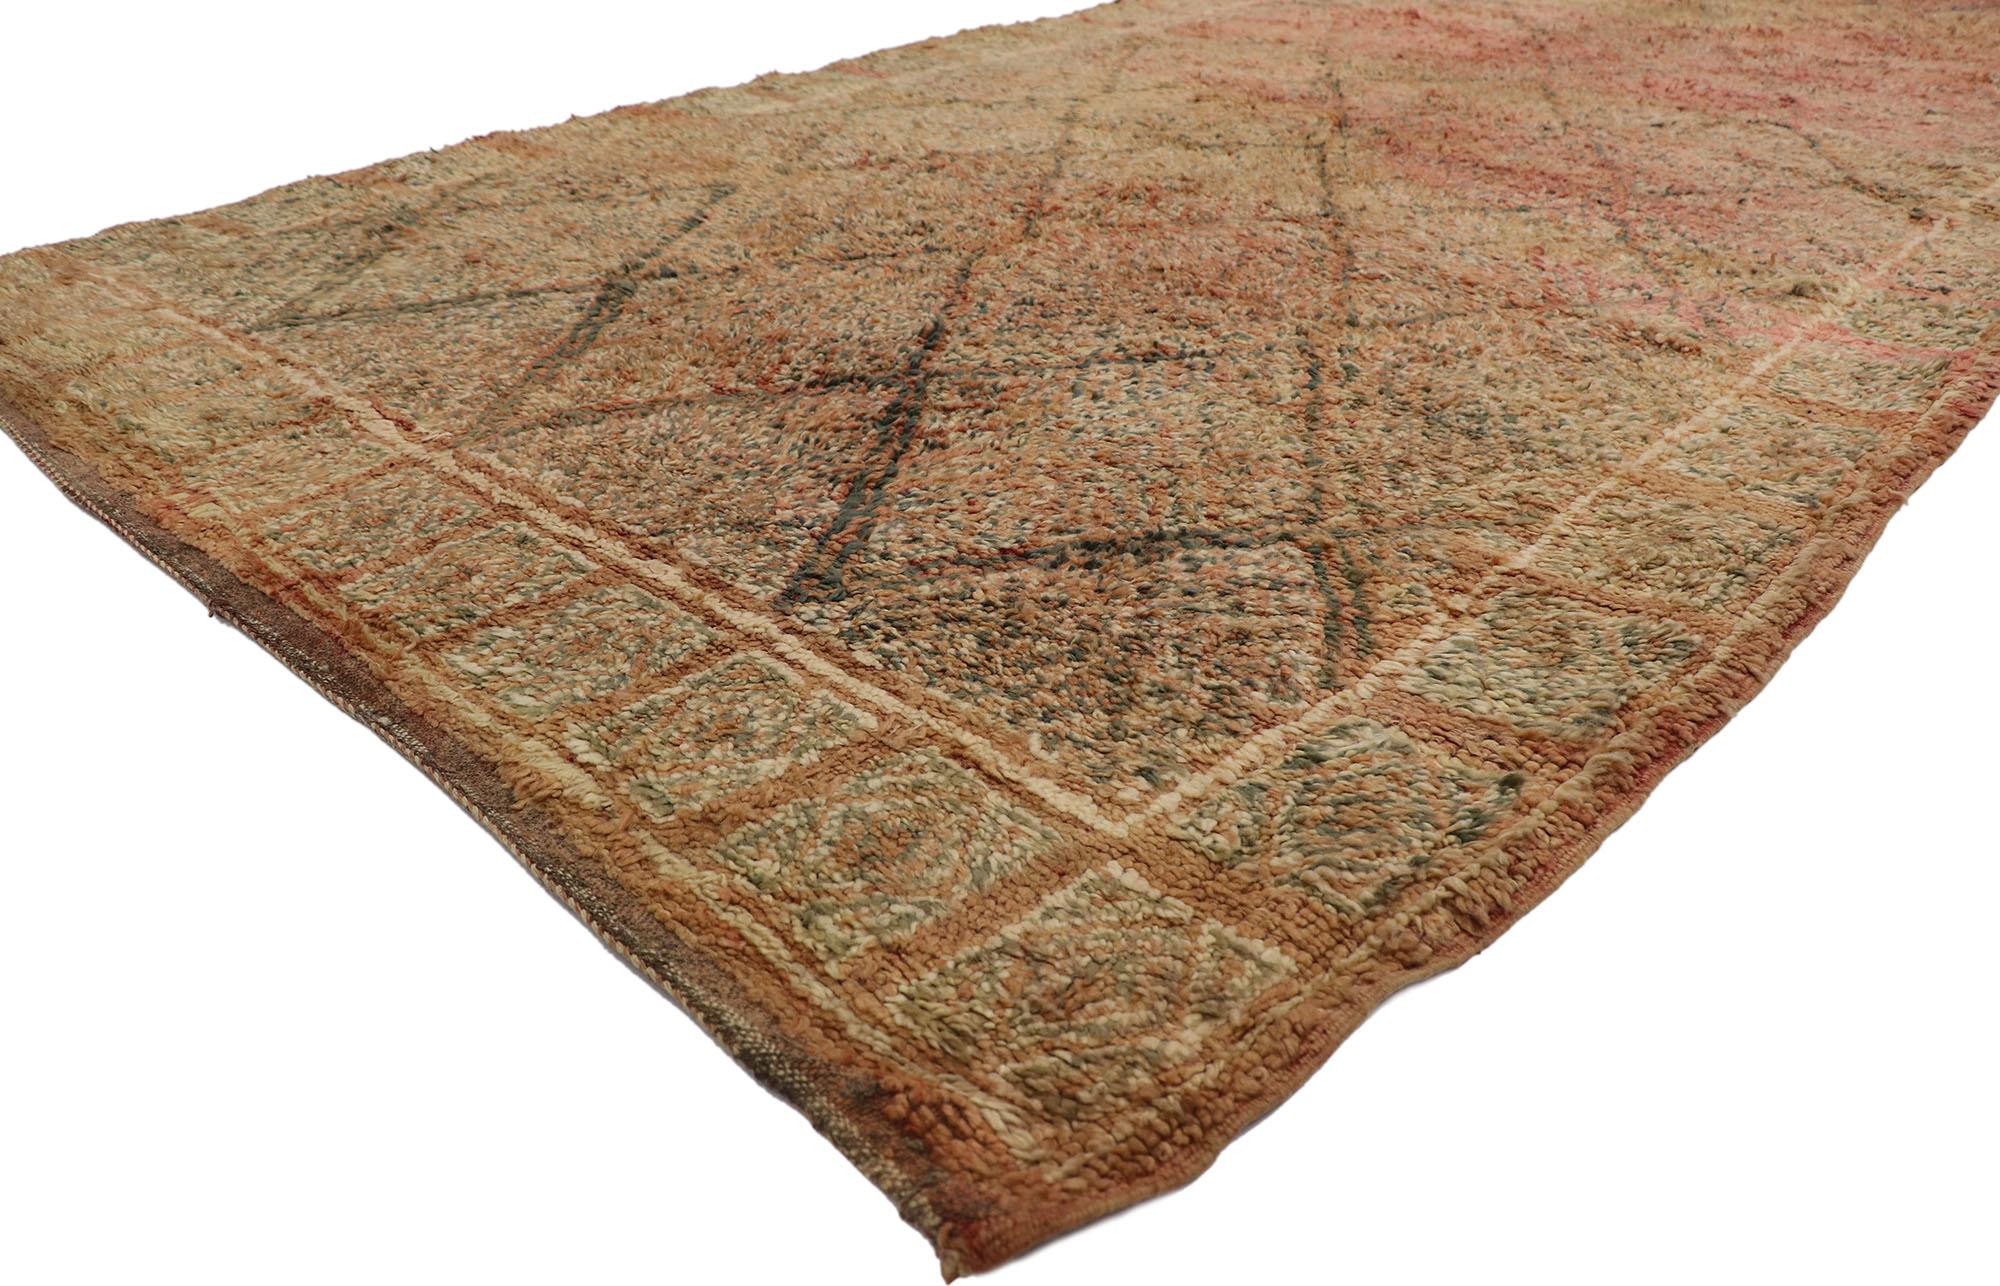 21251, vintage Berber Zayane Moroccan rug with Modern Rustic style. Showcasing an expressive design in warm hues, incredible detail and texture, this hand knotted wool vintage Berber Zayane Moroccan rug is a captivating vision of woven beauty. The